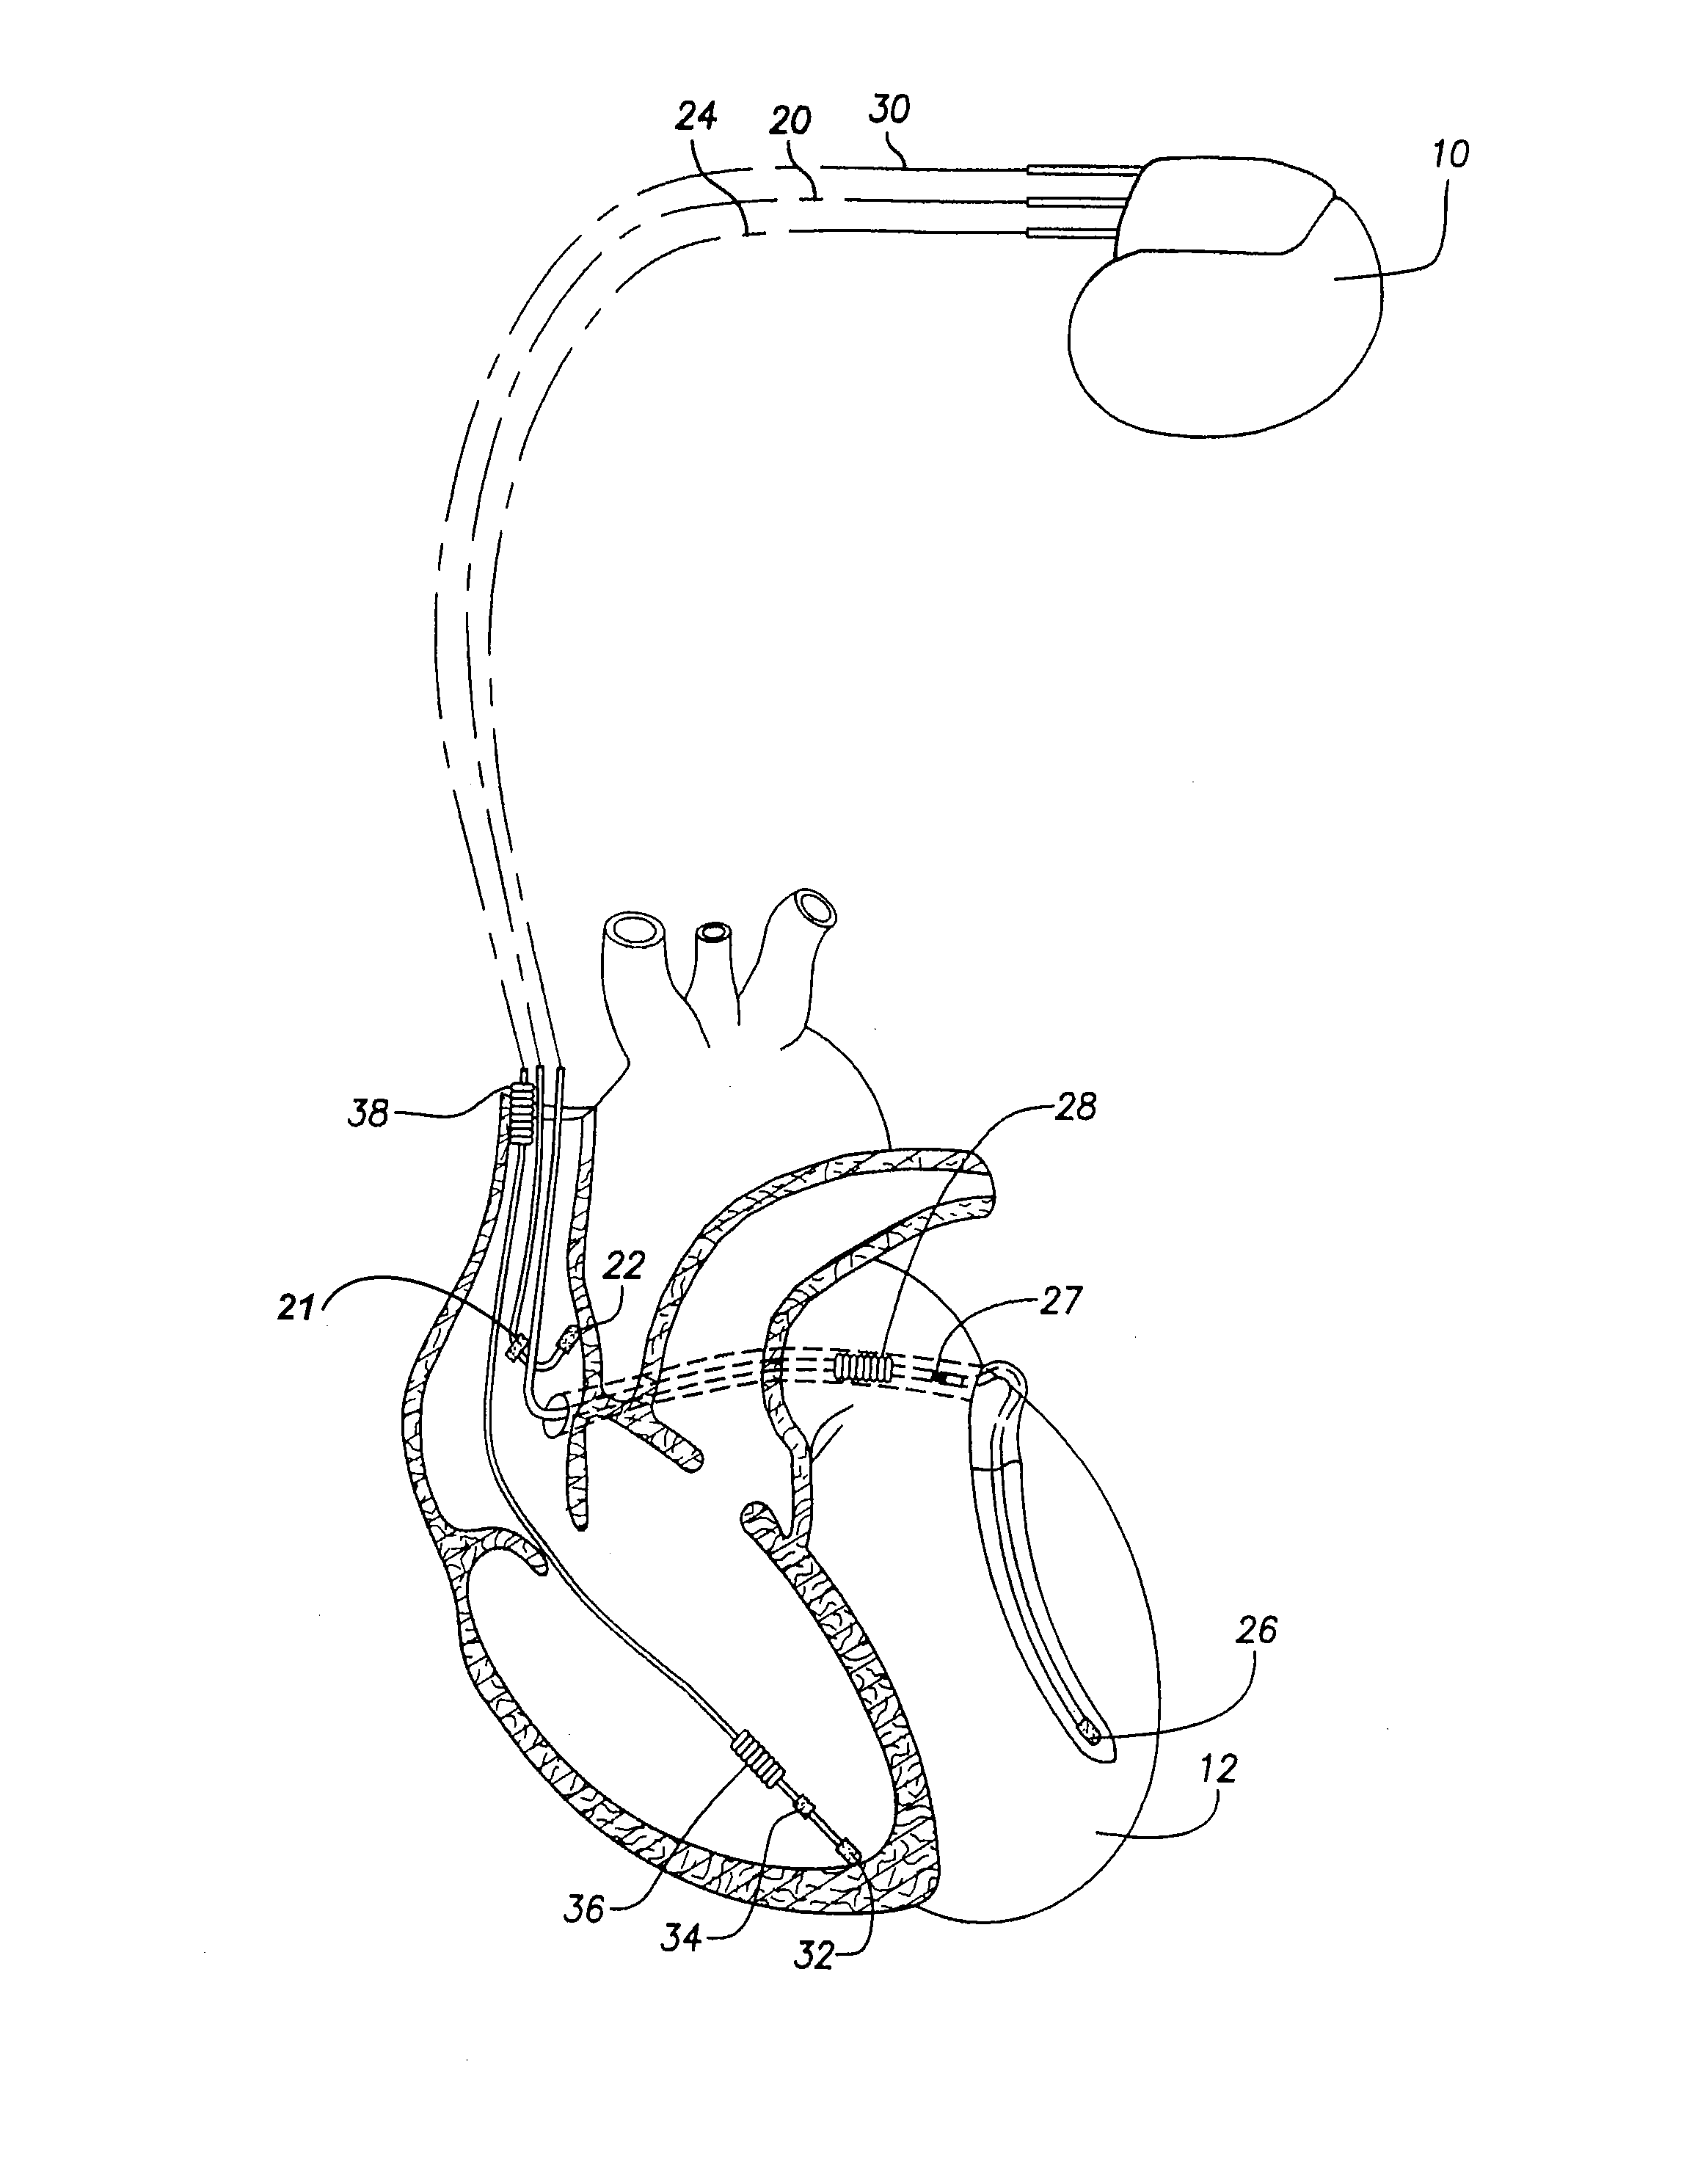 Systems and methods for preventing, detecting, and terminating pacemaker mediated tachycardia in biventricular implantable cardiac stimulation systems